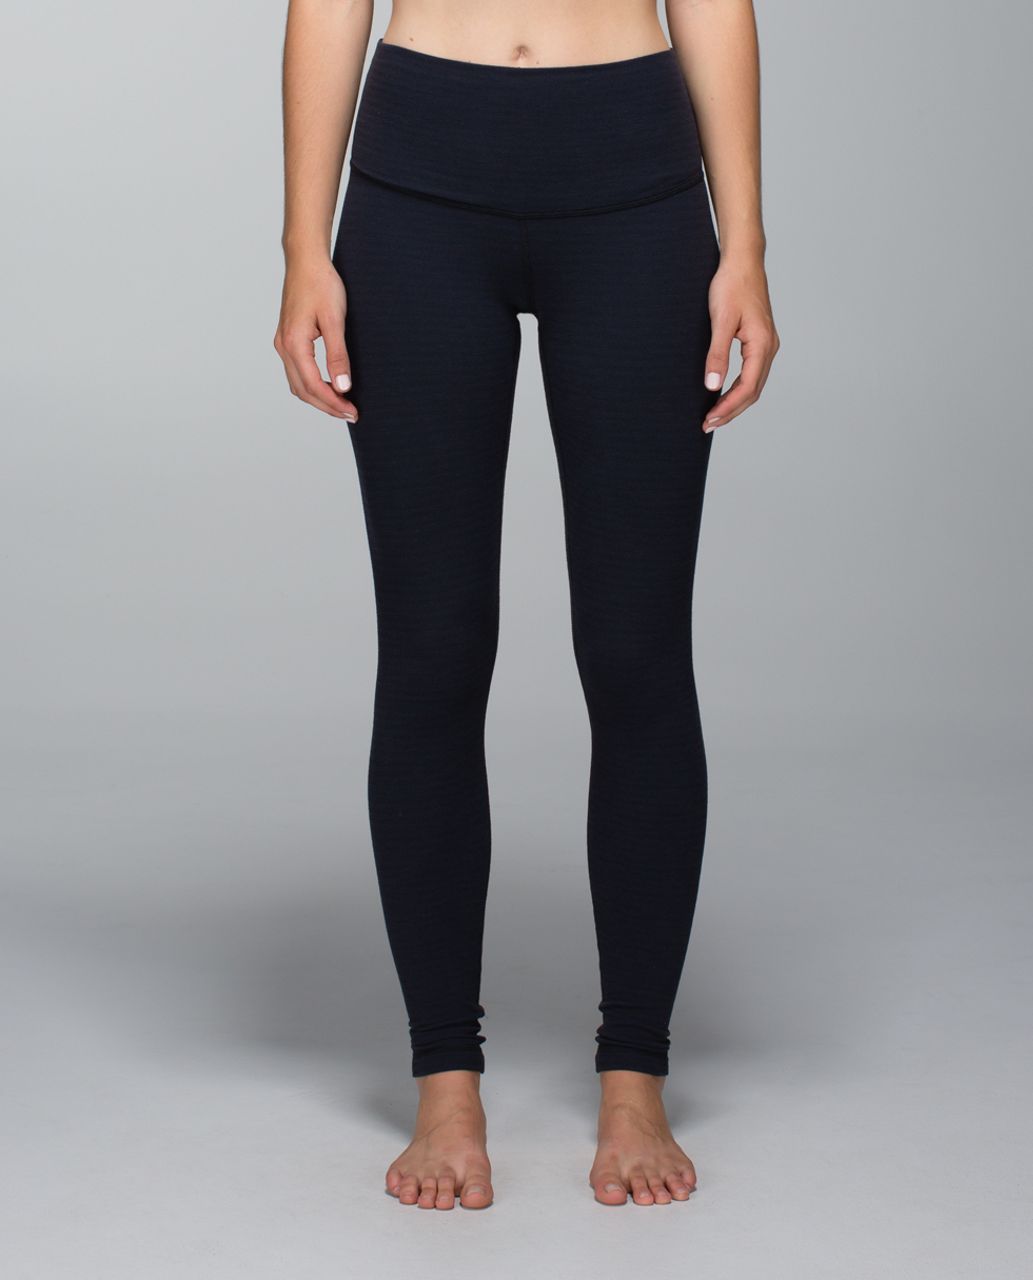 Lululemon Wunder Under Pant (Roll Down) - Luon Pique Inkwell Black